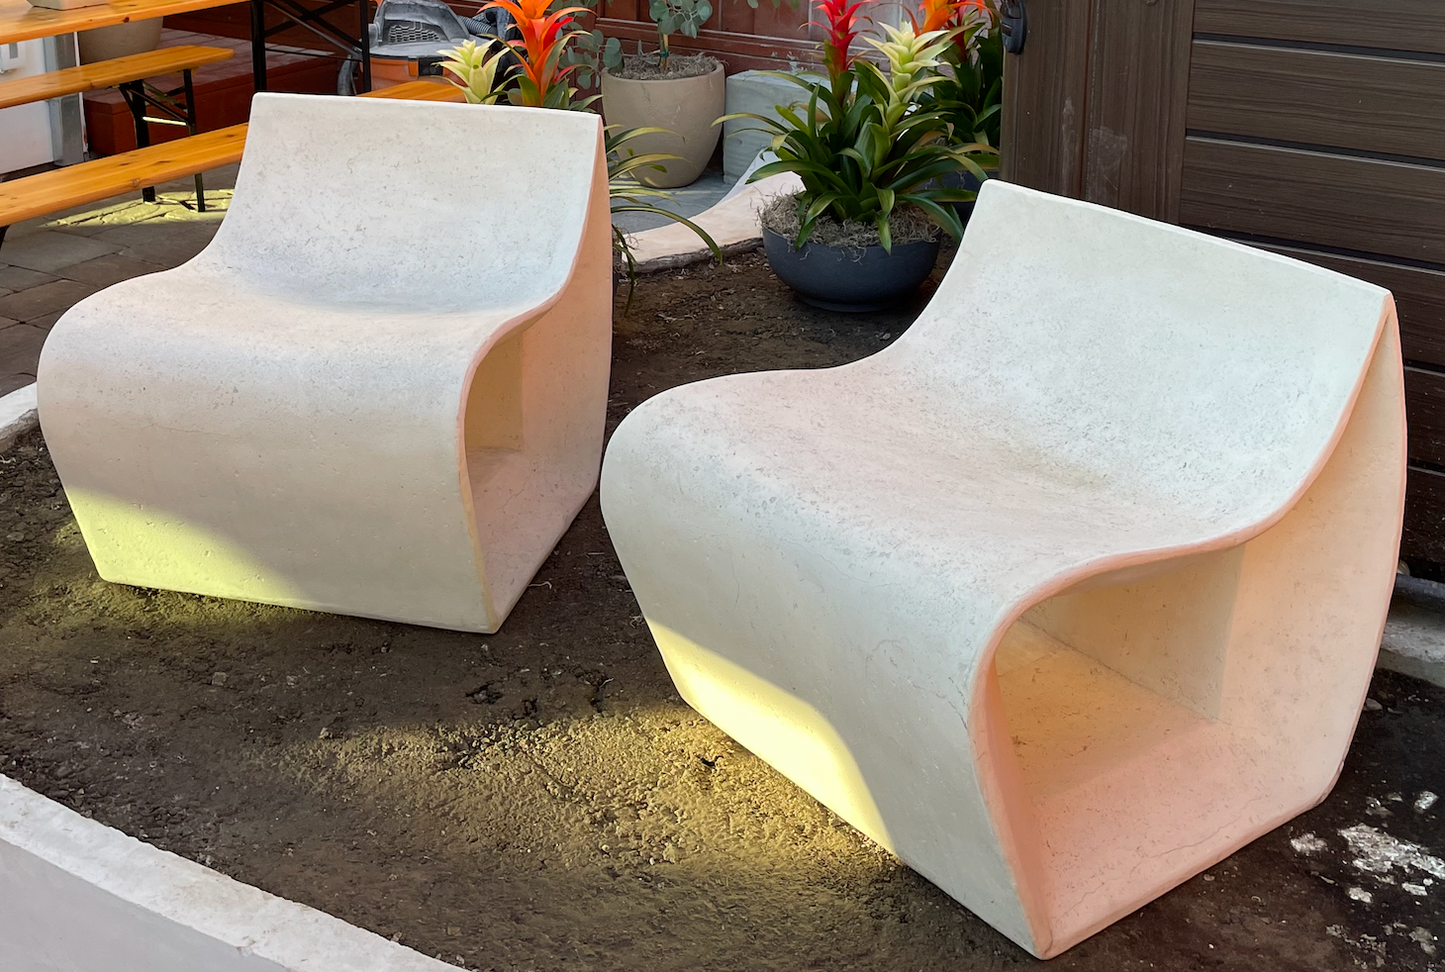 Cast resin chair, white stone